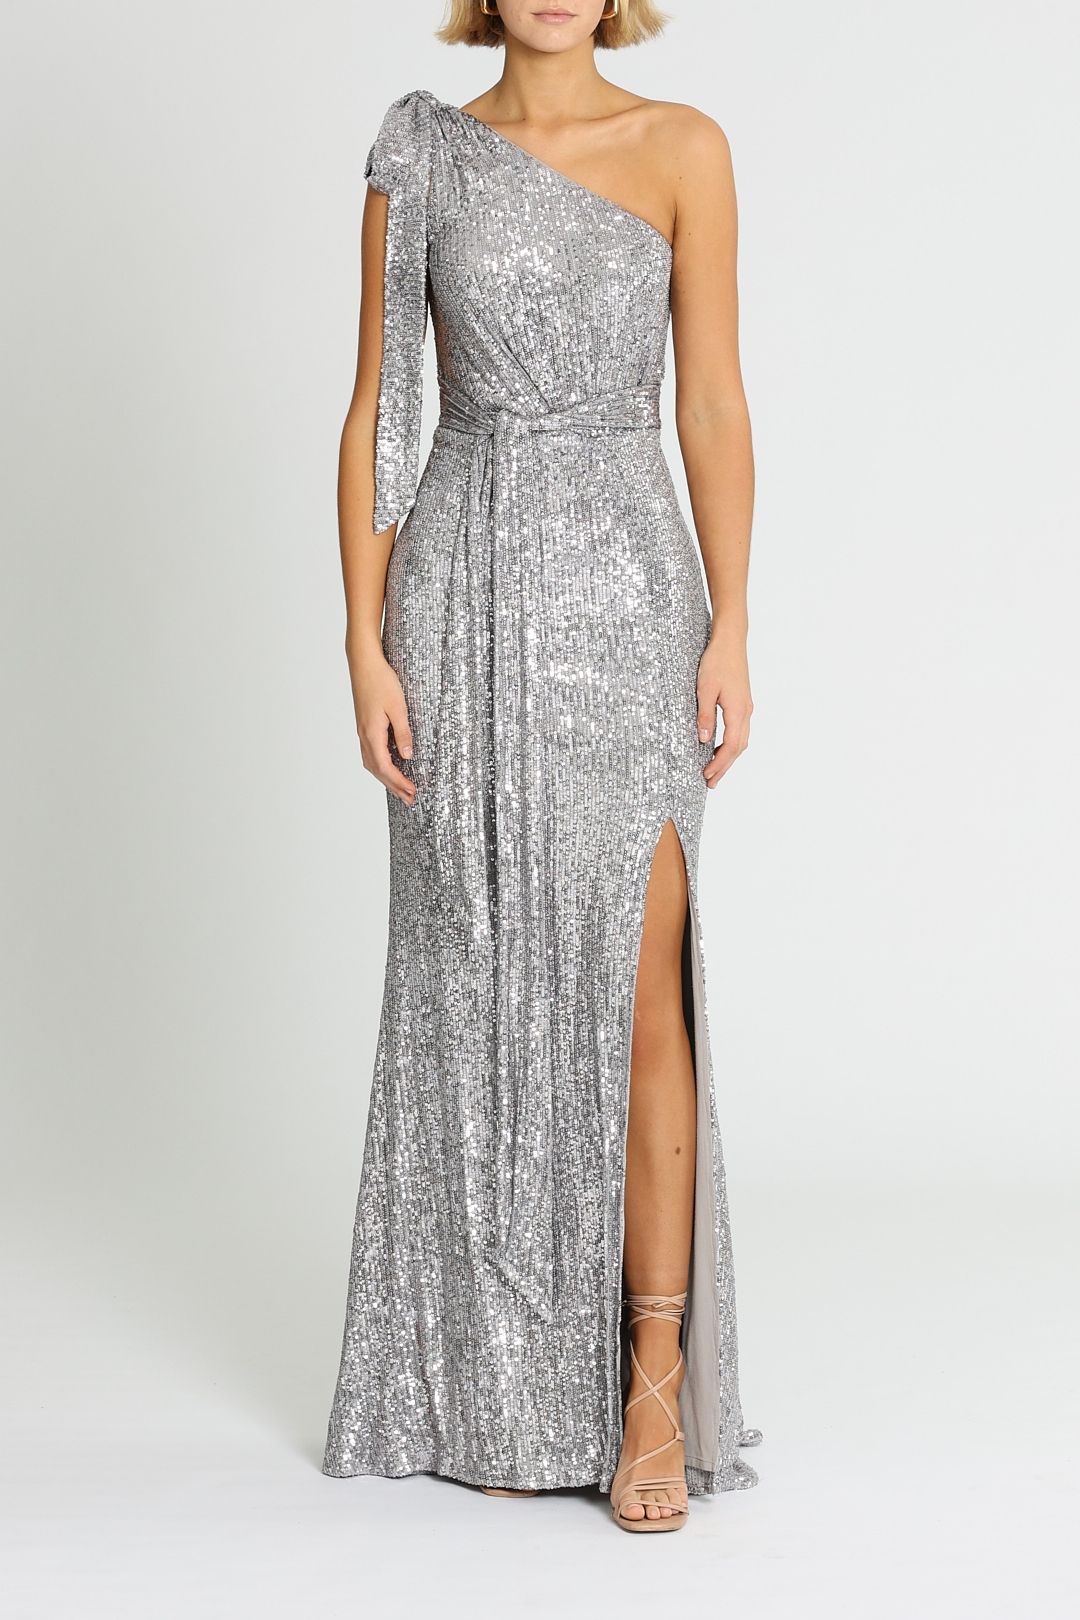 Love Honor Scala Sequin Gown Pewter Silver